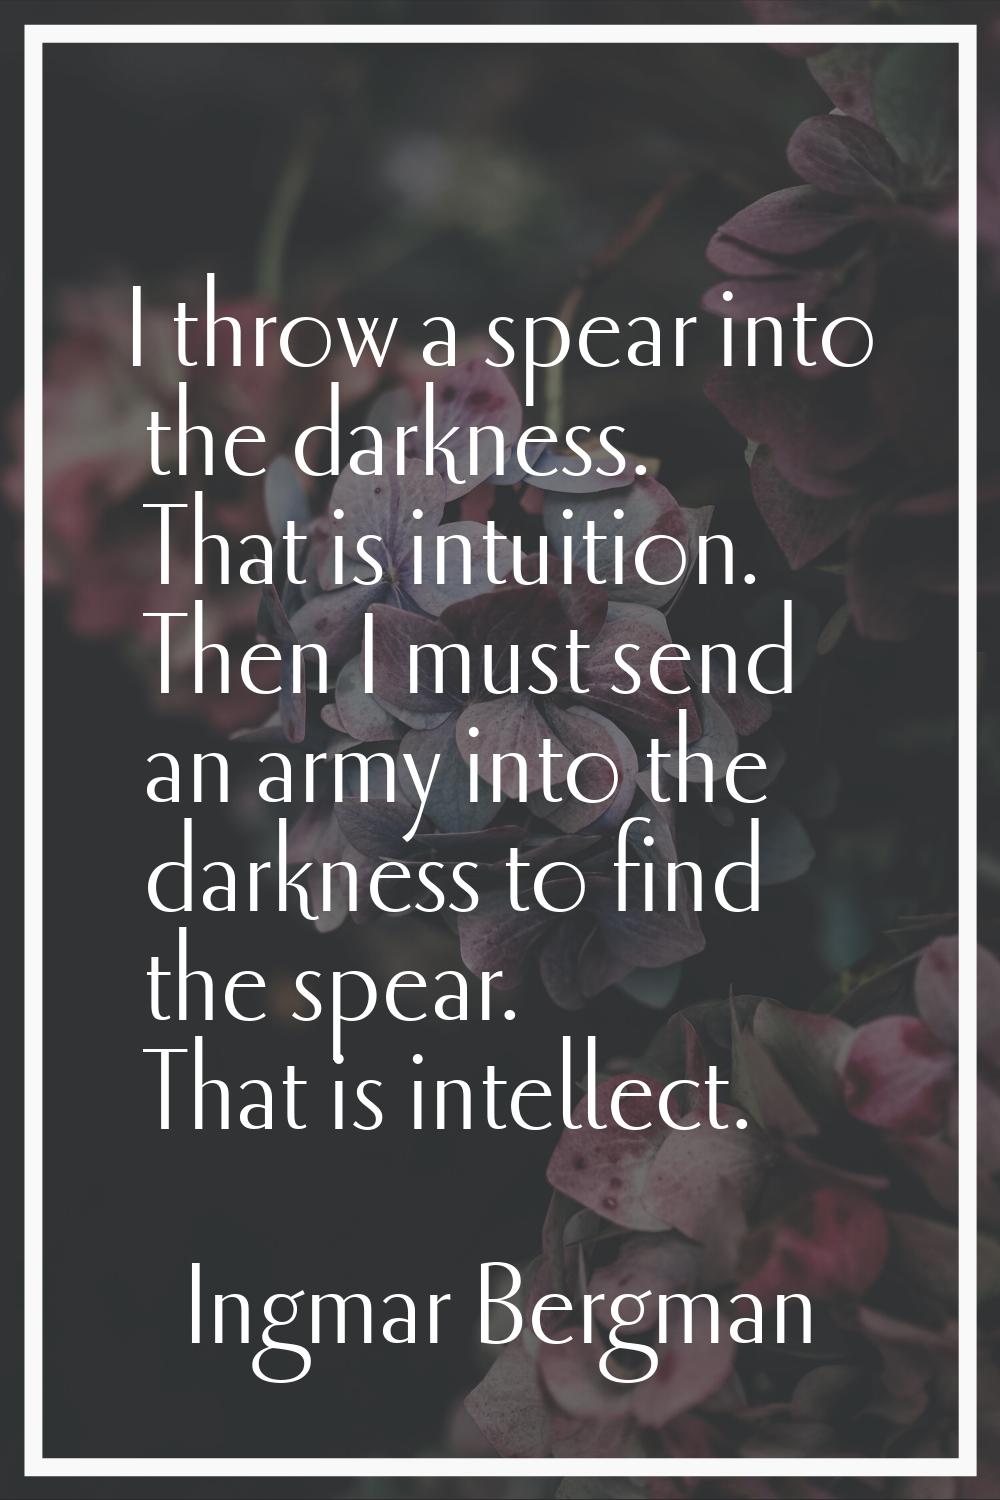 I throw a spear into the darkness. That is intuition. Then I must send an army into the darkness to